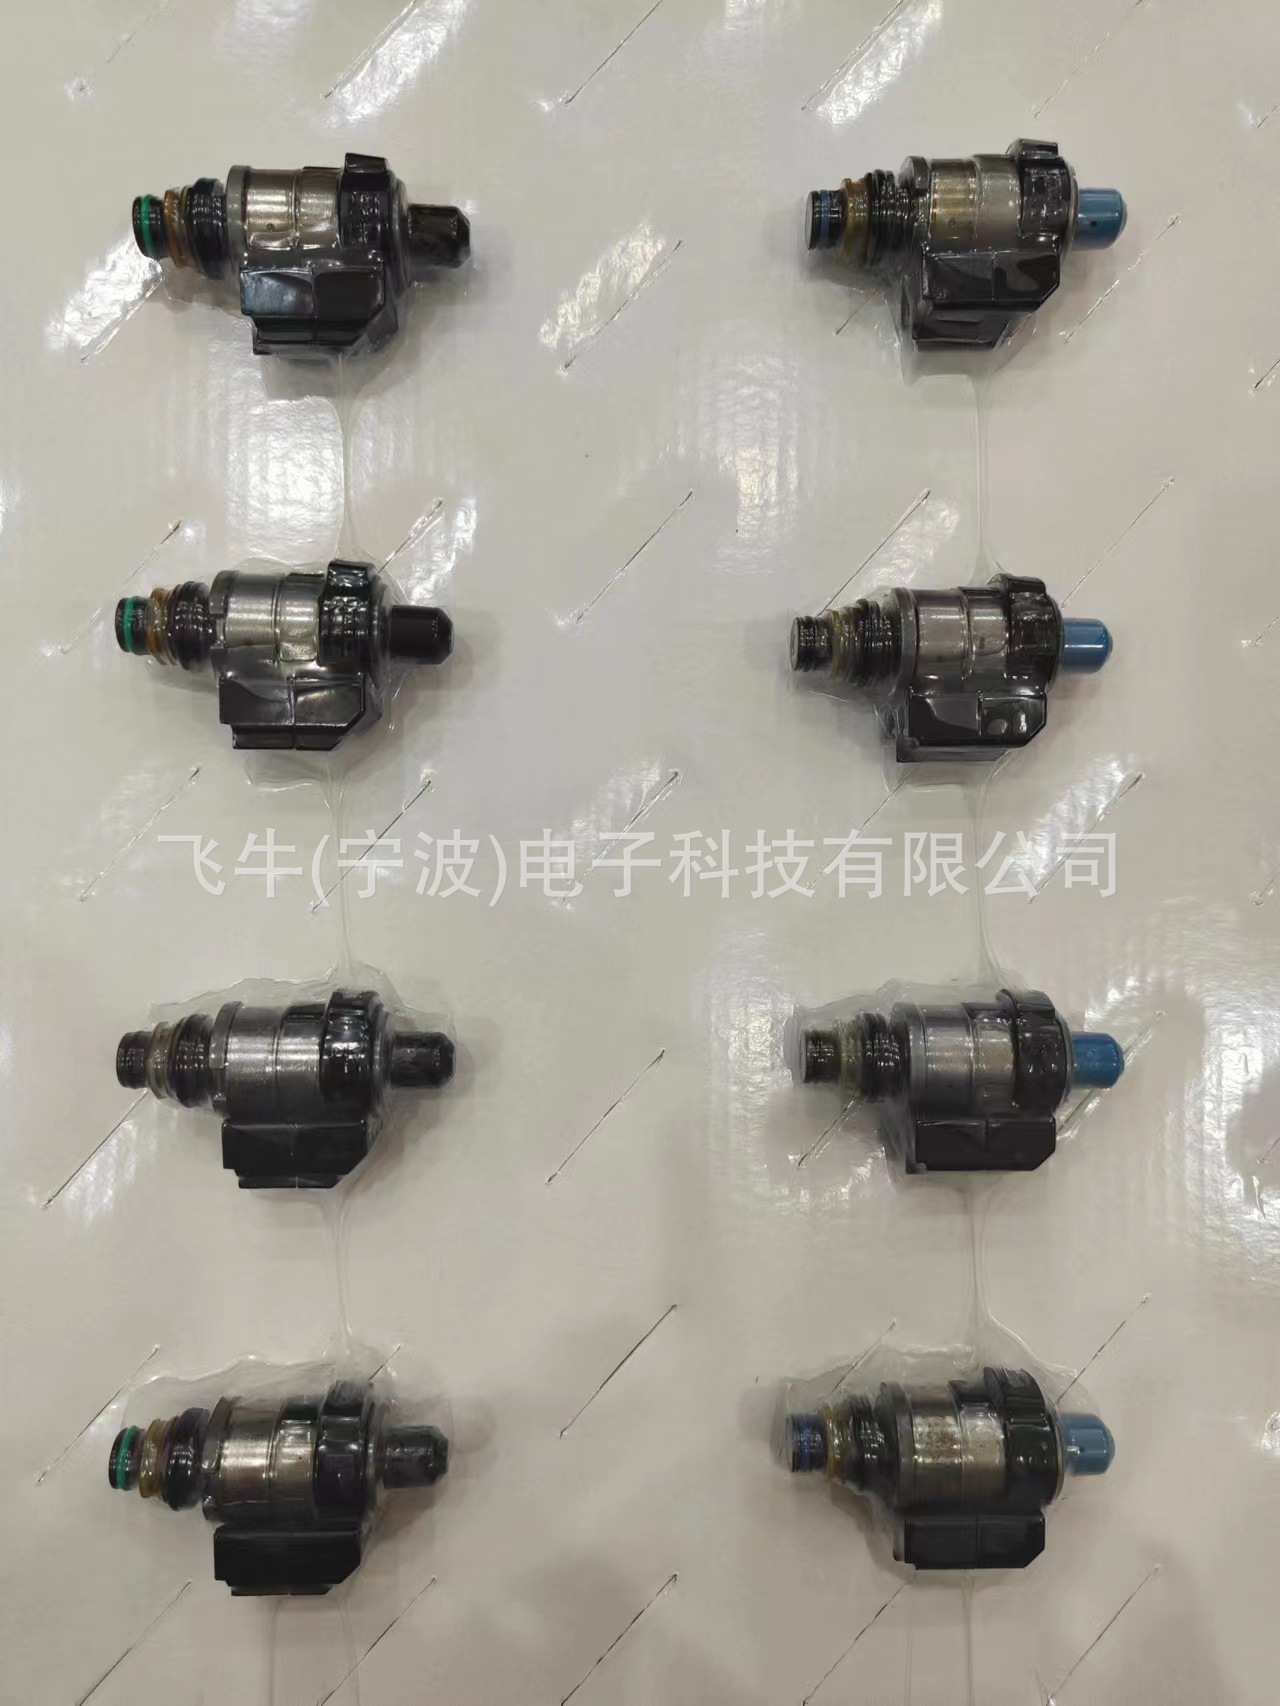 Applicable to Mercedes-Benz 722.9 722.8 solenoid valve 0260130035 0260130034 2202271098